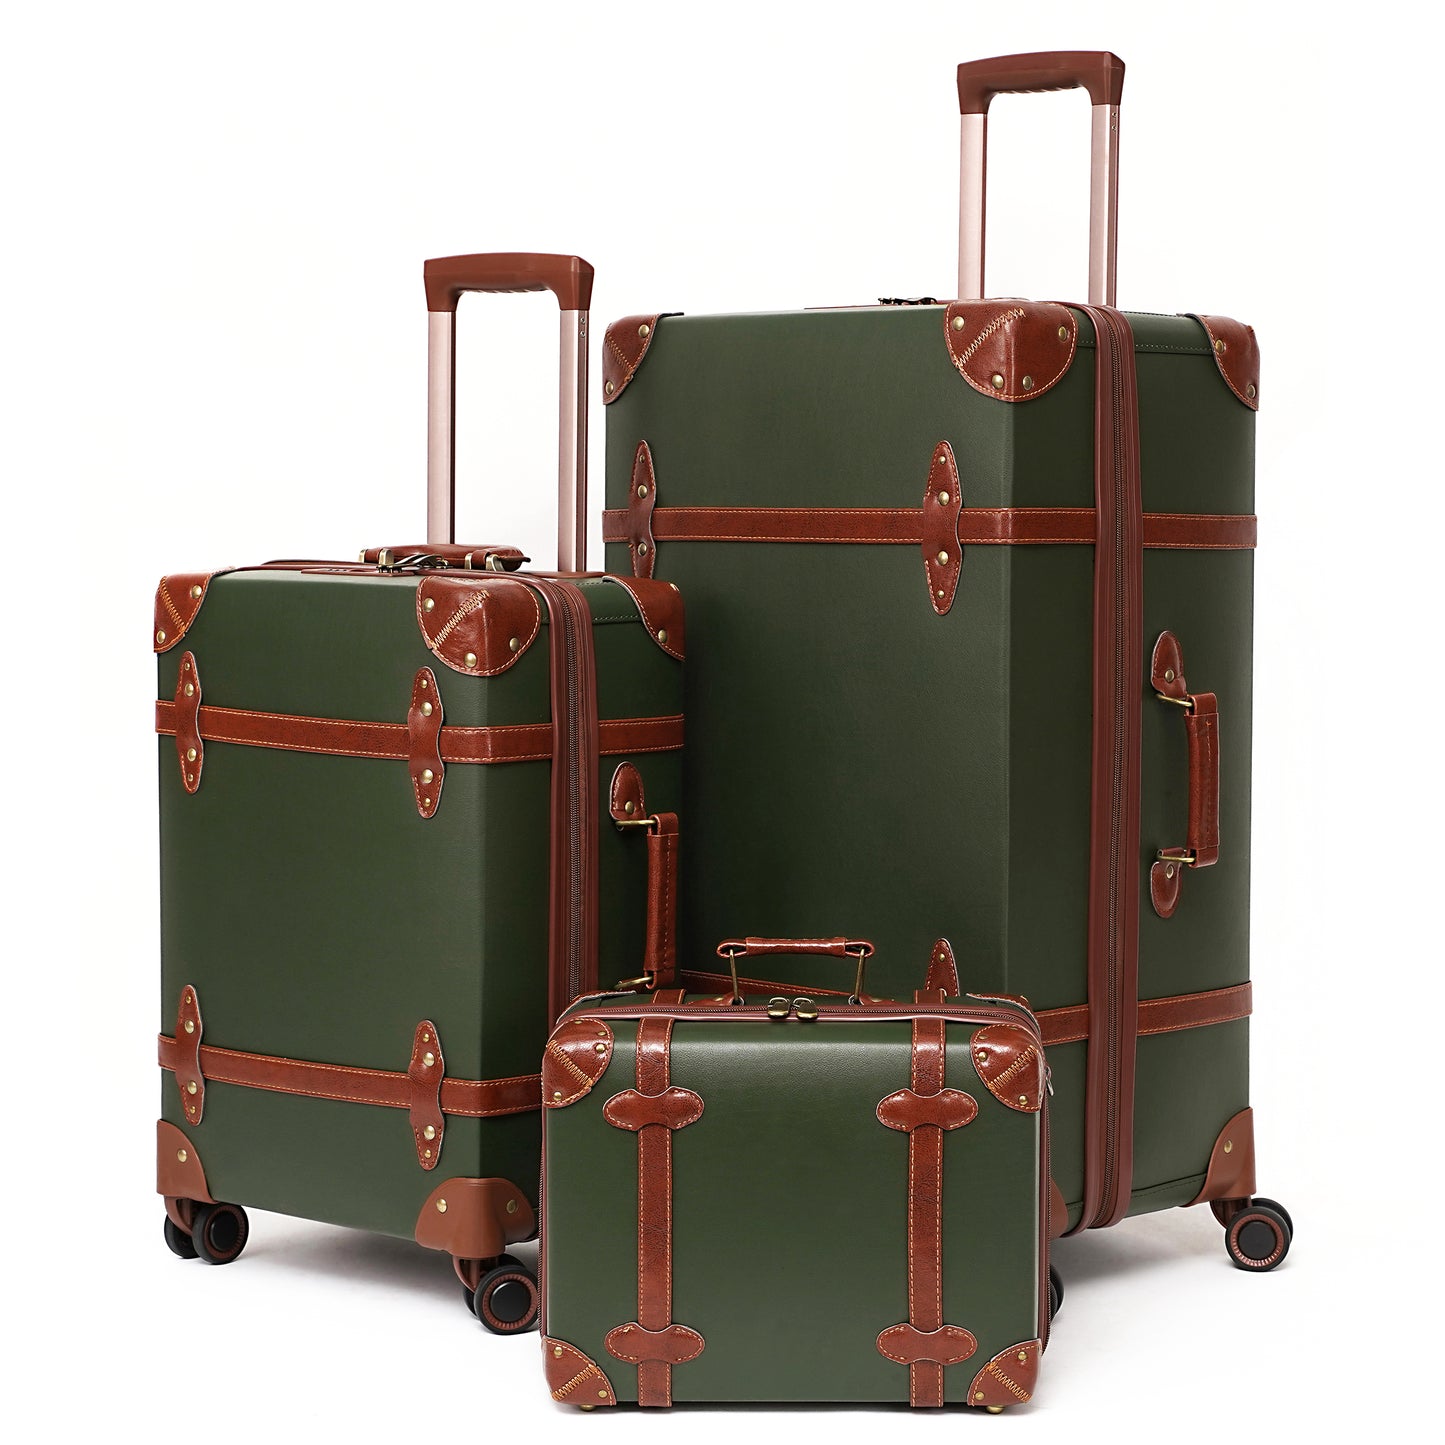 COTRUNKAGE Vintage Luggage Sets 2 Pieces, 20 Inch Tsa Approved